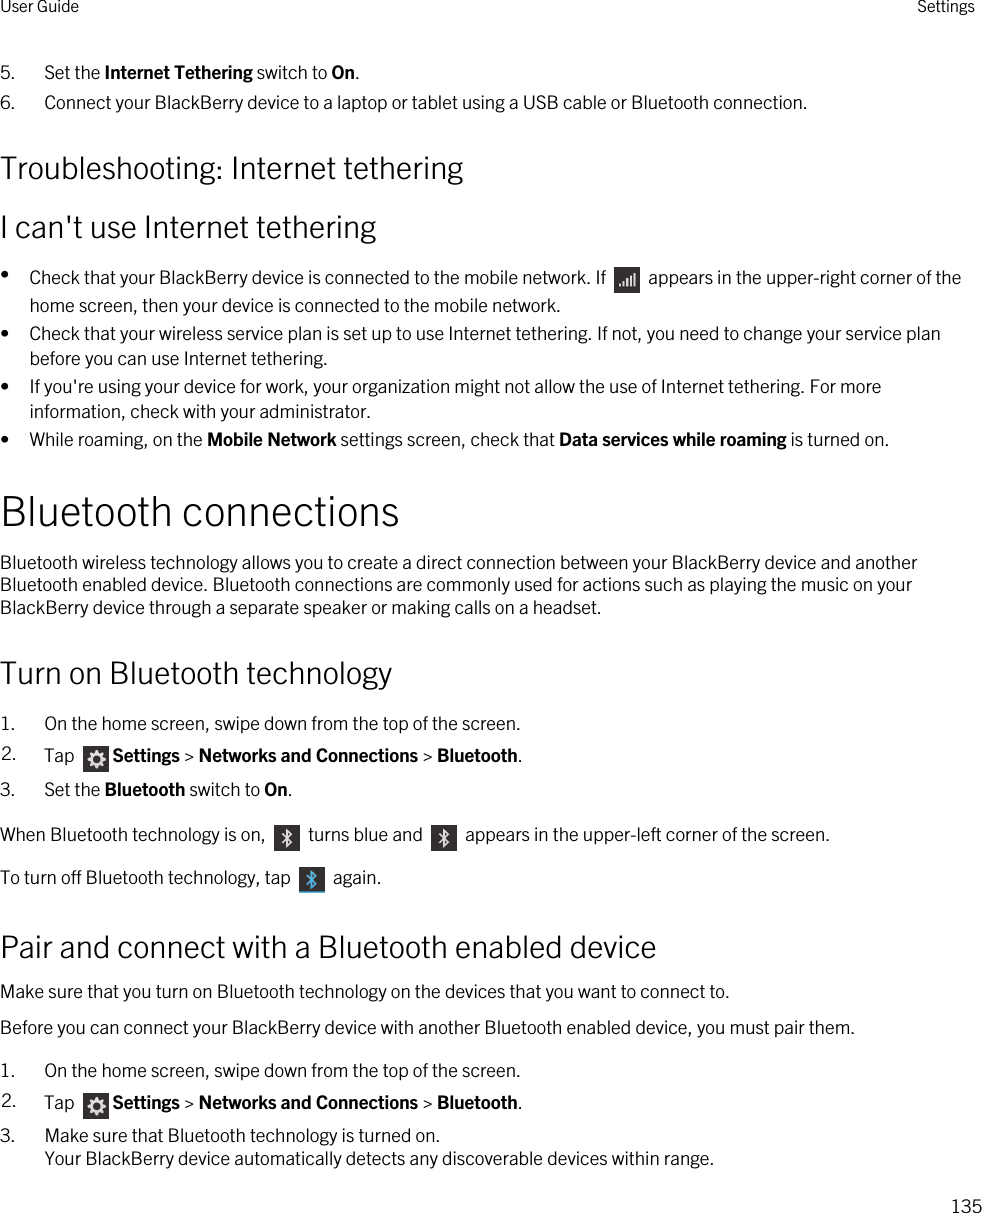 5. Set the Internet Tethering switch to On.6. Connect your BlackBerry device to a laptop or tablet using a USB cable or Bluetooth connection.Troubleshooting: Internet tetheringI can&apos;t use Internet tethering•Check that your BlackBerry device is connected to the mobile network. If   appears in the upper-right corner of the home screen, then your device is connected to the mobile network.• Check that your wireless service plan is set up to use Internet tethering. If not, you need to change your service plan before you can use Internet tethering.• If you&apos;re using your device for work, your organization might not allow the use of Internet tethering. For more information, check with your administrator.• While roaming, on the Mobile Network settings screen, check that Data services while roaming is turned on.Bluetooth connectionsBluetooth wireless technology allows you to create a direct connection between your BlackBerry device and another Bluetooth enabled device. Bluetooth connections are commonly used for actions such as playing the music on your BlackBerry device through a separate speaker or making calls on a headset.Turn on Bluetooth technology1. On the home screen, swipe down from the top of the screen.2. Tap  Settings &gt; Networks and Connections &gt; Bluetooth.3. Set the Bluetooth switch to On.When Bluetooth technology is on,   turns blue and   appears in the upper-left corner of the screen.To turn off Bluetooth technology, tap   again.Pair and connect with a Bluetooth enabled deviceMake sure that you turn on Bluetooth technology on the devices that you want to connect to.Before you can connect your BlackBerry device with another Bluetooth enabled device, you must pair them.1. On the home screen, swipe down from the top of the screen.2. Tap  Settings &gt; Networks and Connections &gt; Bluetooth.3. Make sure that Bluetooth technology is turned on.Your BlackBerry device automatically detects any discoverable devices within range.User Guide Settings135